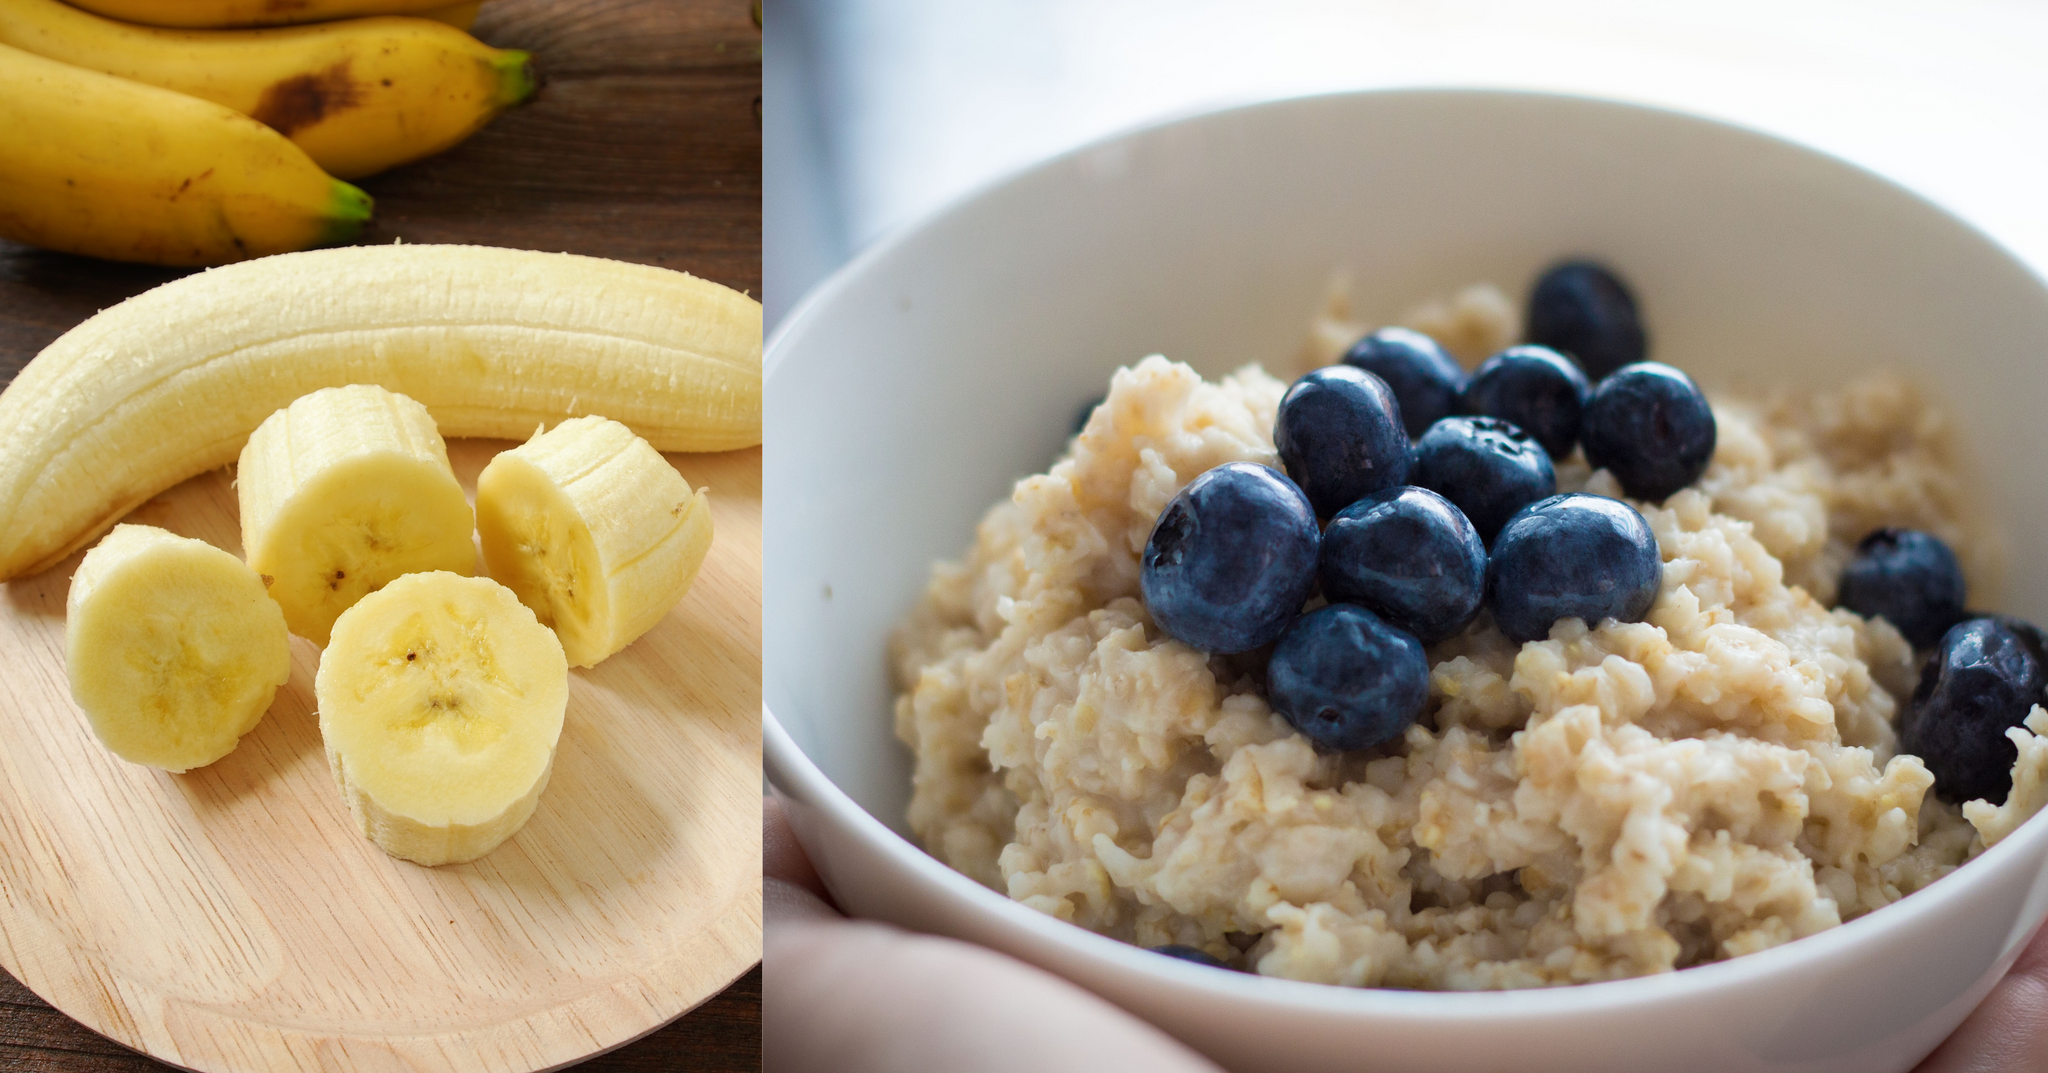 Breakfast food before a workout with bananas and oatmeal